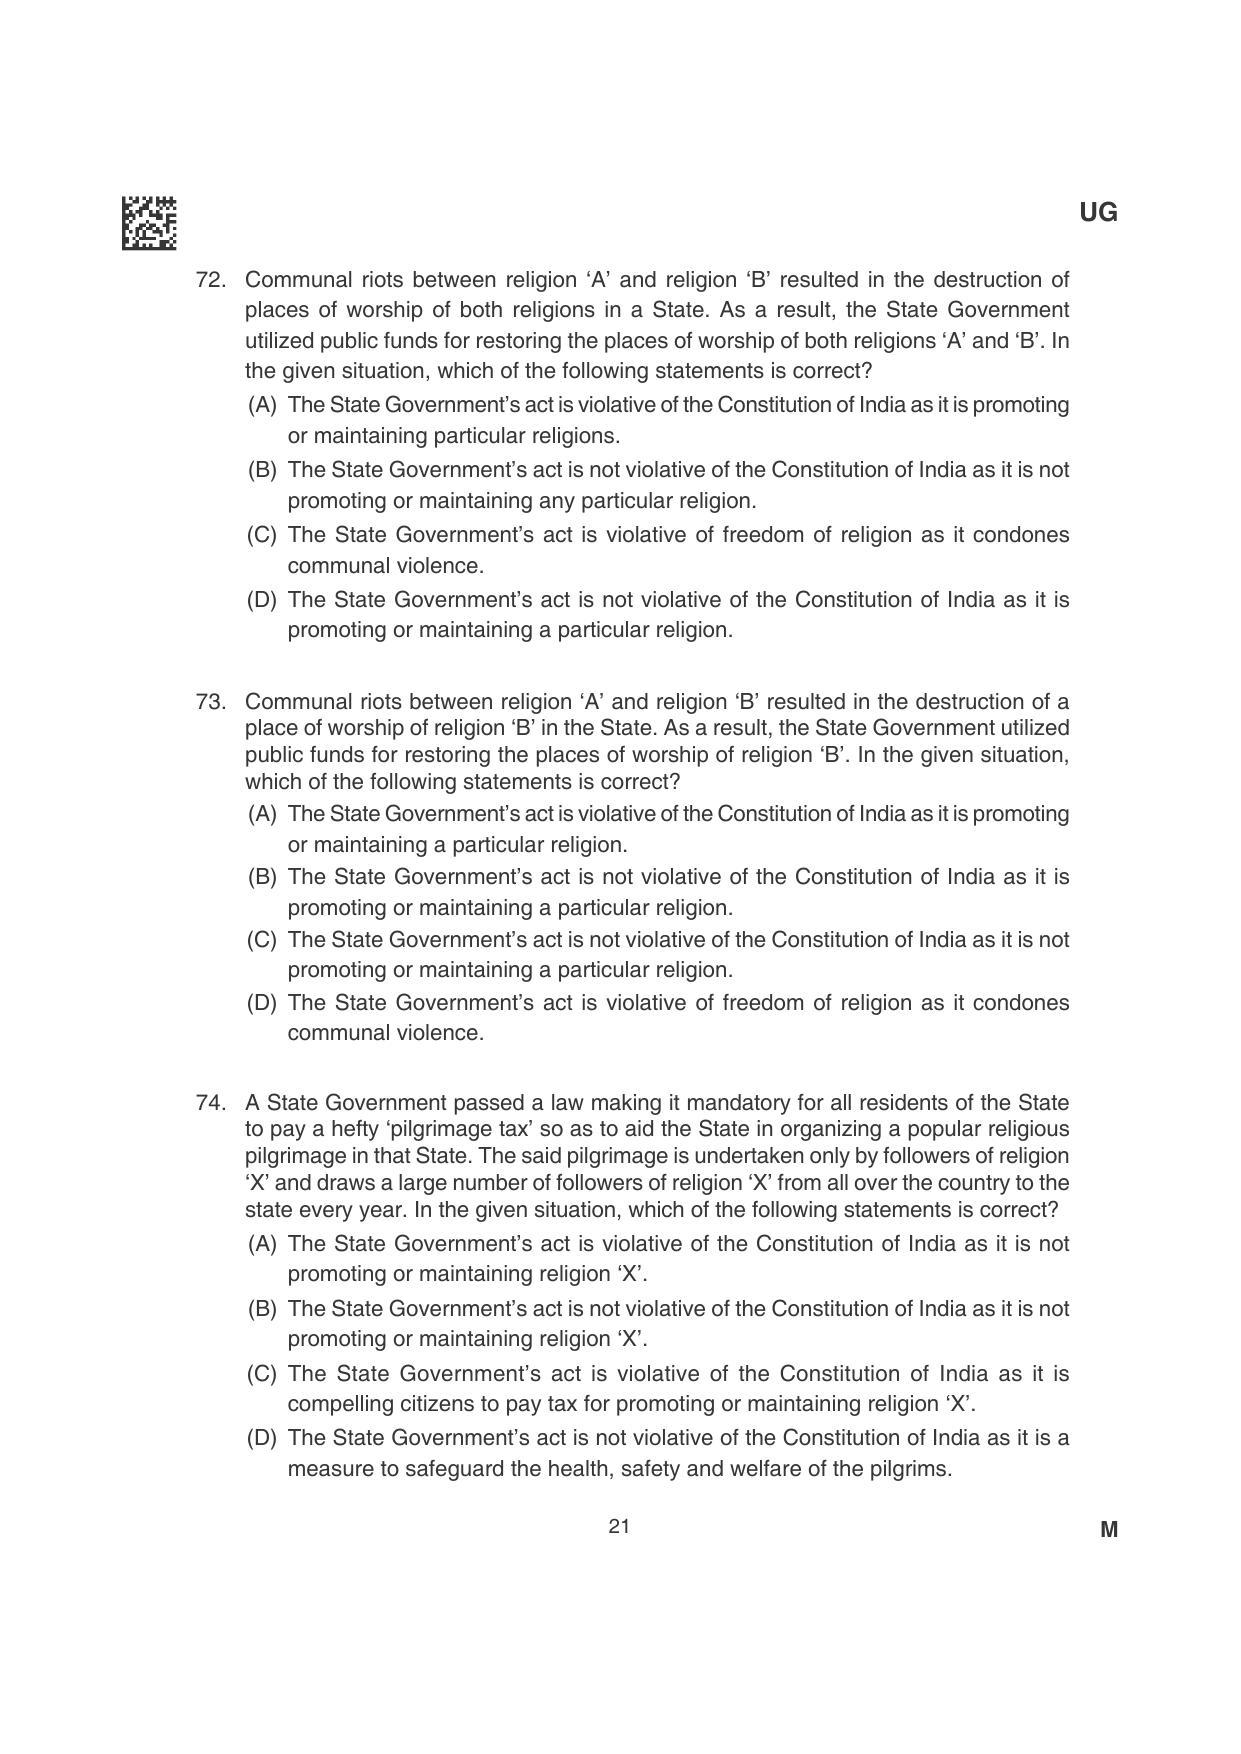 CLAT 2022 UG Question Papers - Page 21